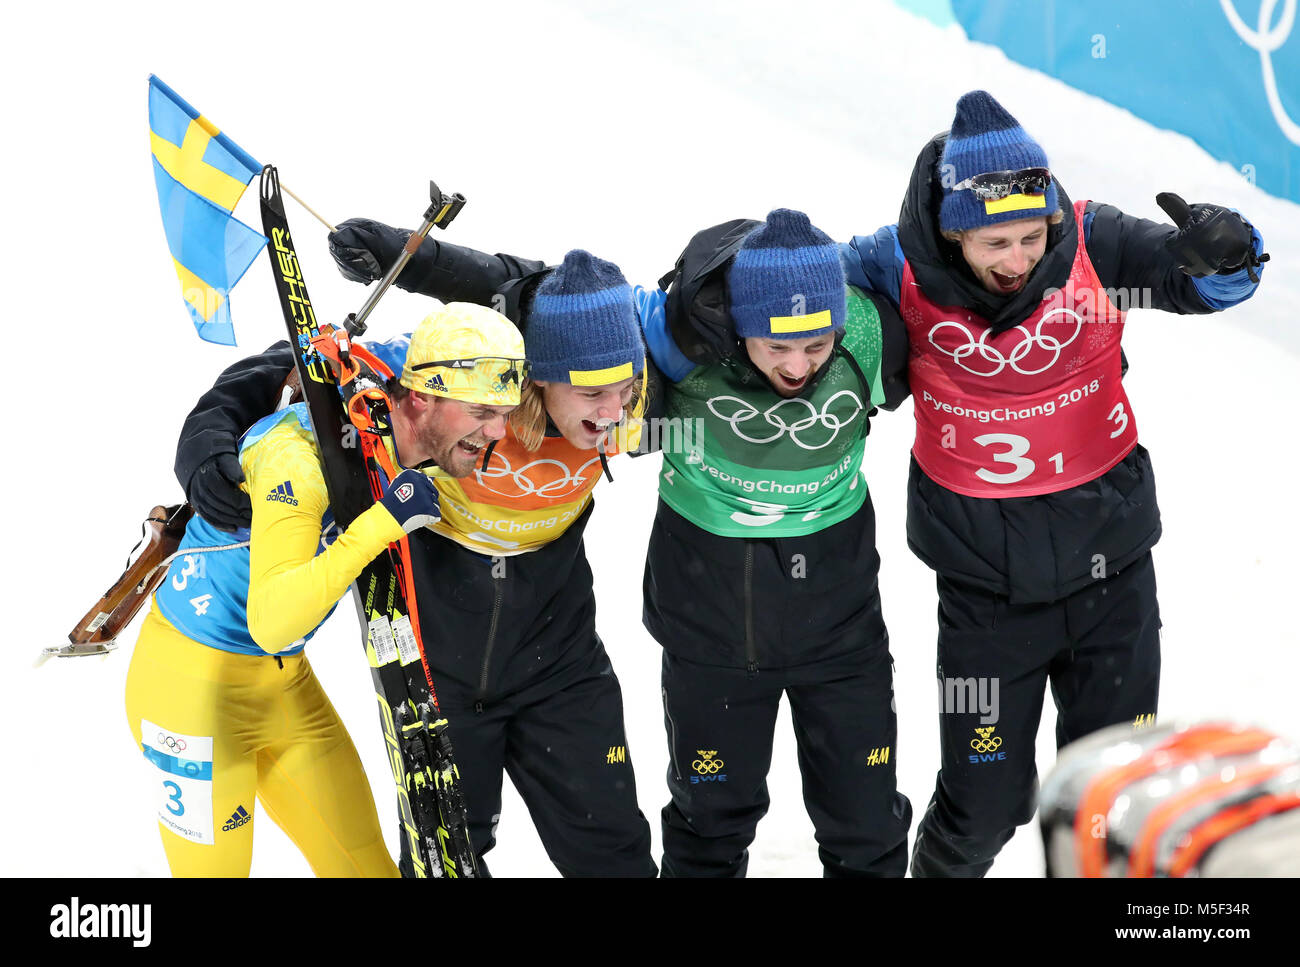 Pyeongchang, South Korea. 23rd Feb, 2018. Peppe Femling, Jesper Nelin, Sebastian Samuelsson and Fredrik Lindstroem (R to L) of team Sweden pose for photos after finishing men's 4x7.5km relay of biathlon at the 2018 PyeongChang Winter Olympic Games at Alpensia Biathlon Centre, PyeongChang, South Korea, Feb. 23, 2018. Team Sweden claimed champion in a time of 1:15:16.5. Credit: Li Gang/Xinhua/Alamy Live News Stock Photo